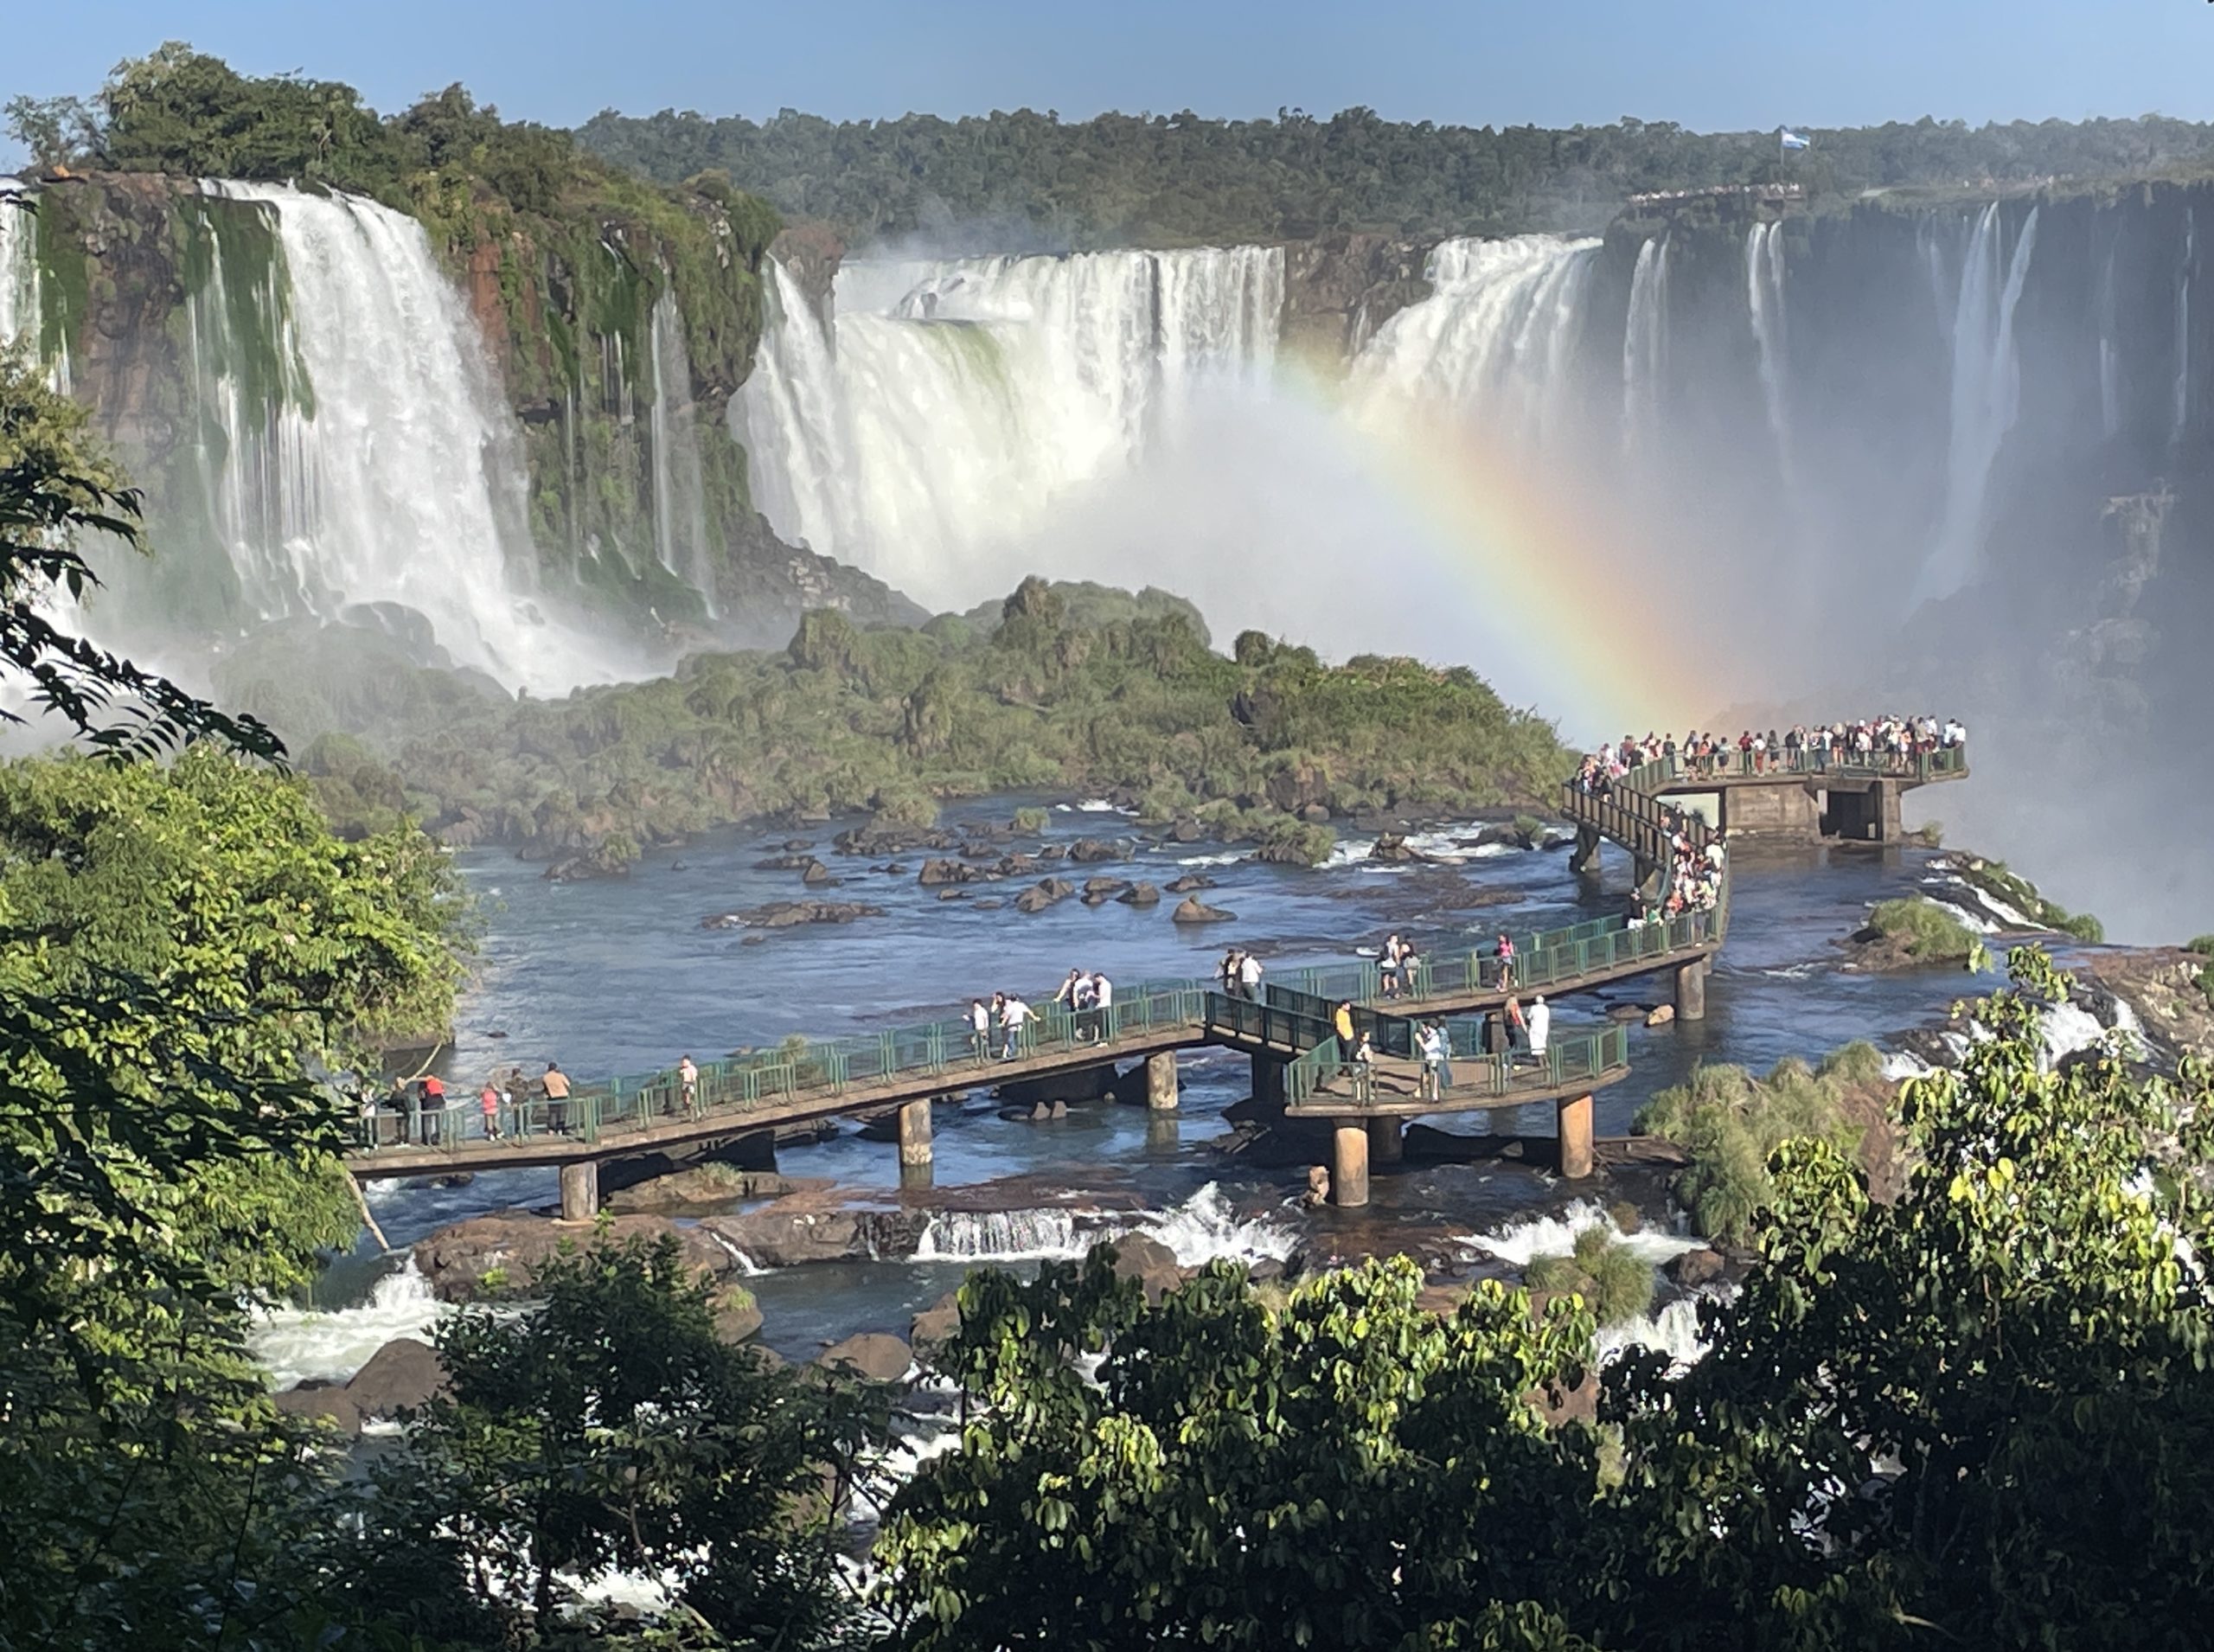 Iguazú Falls: The Largest System of Waterfalls in the World